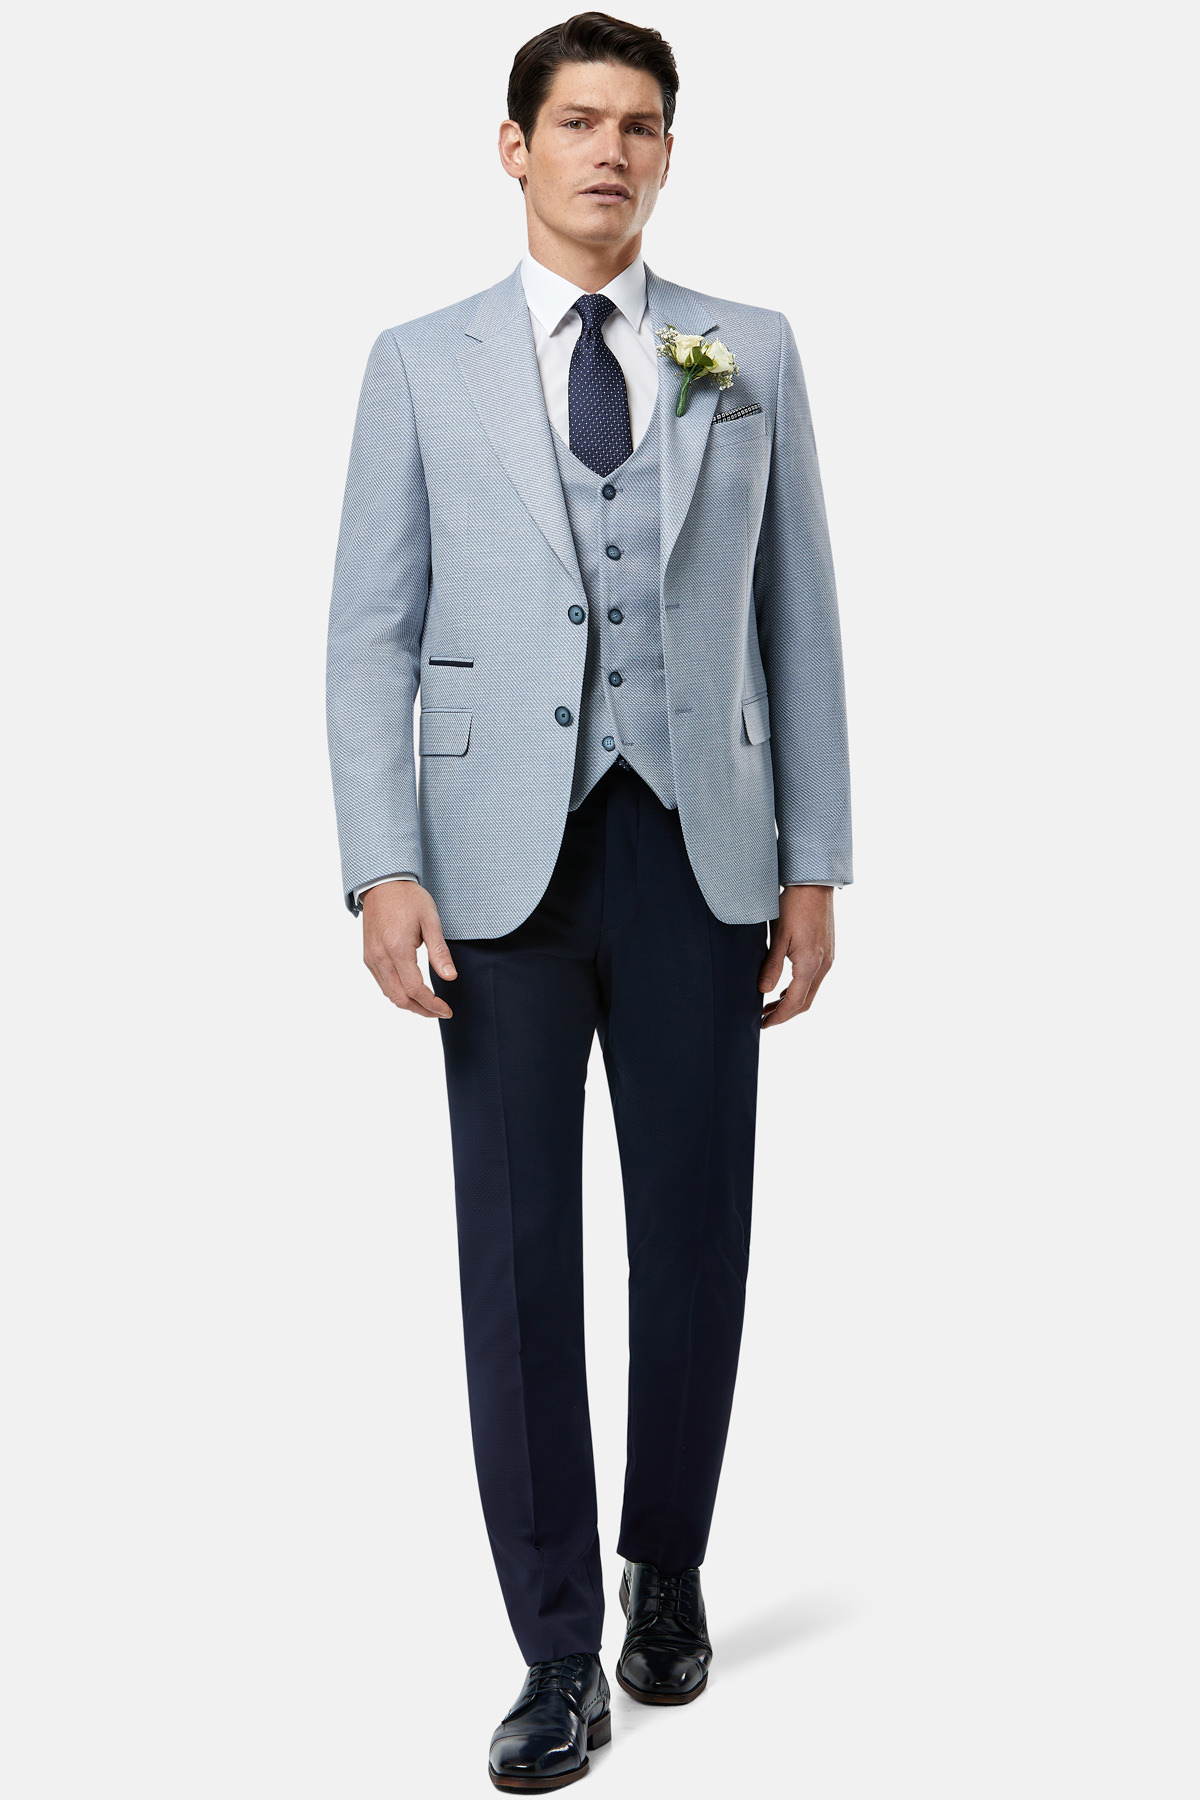 Harold Ice 3 Piece Suit - Tom Murphy's Formal and Menswear